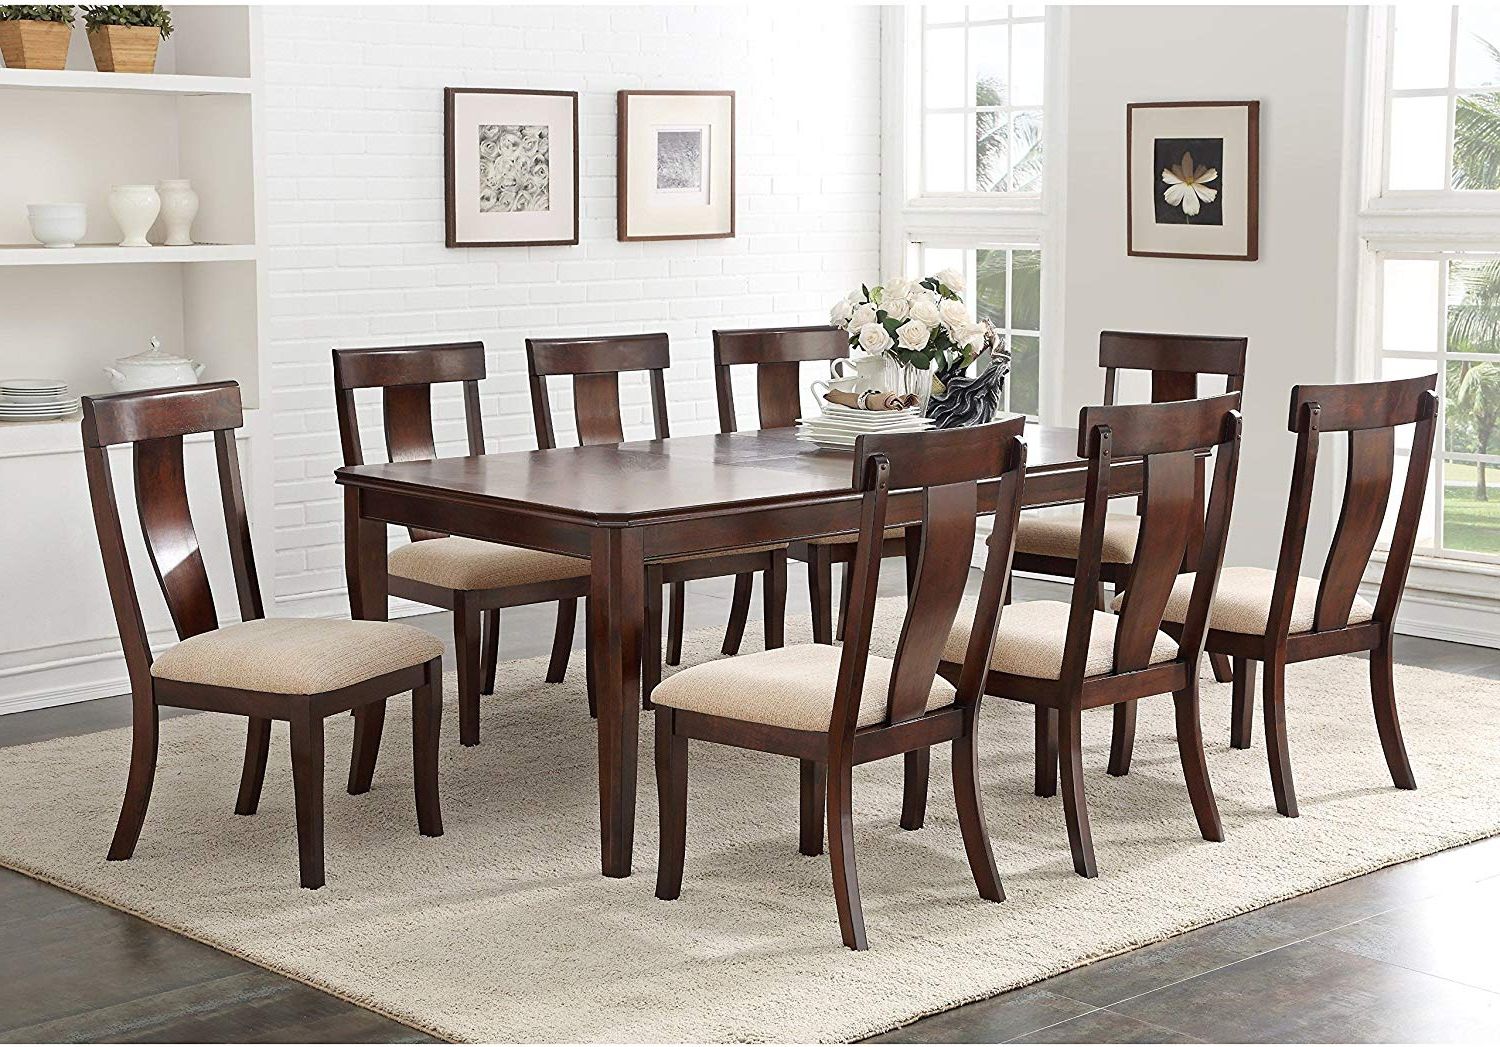 Modern Dining Room Set 12 Chairs